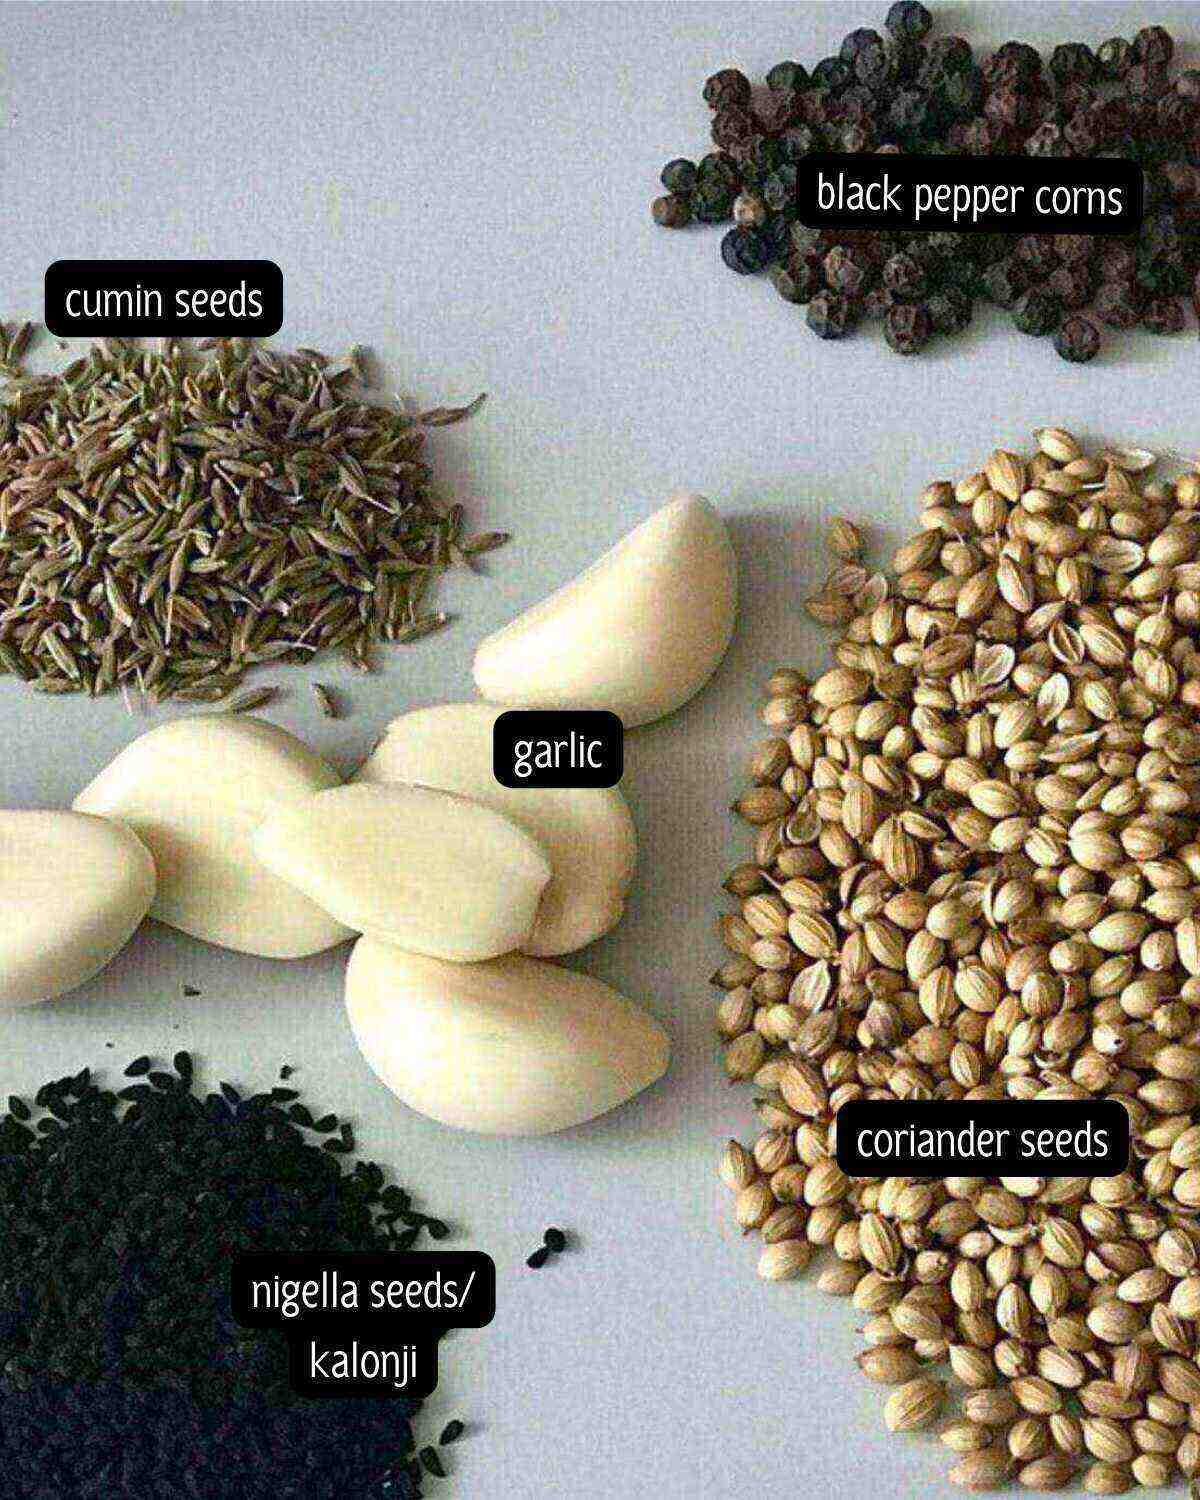 Ingredients for garlic pepper seasoning placed on a light blue background.